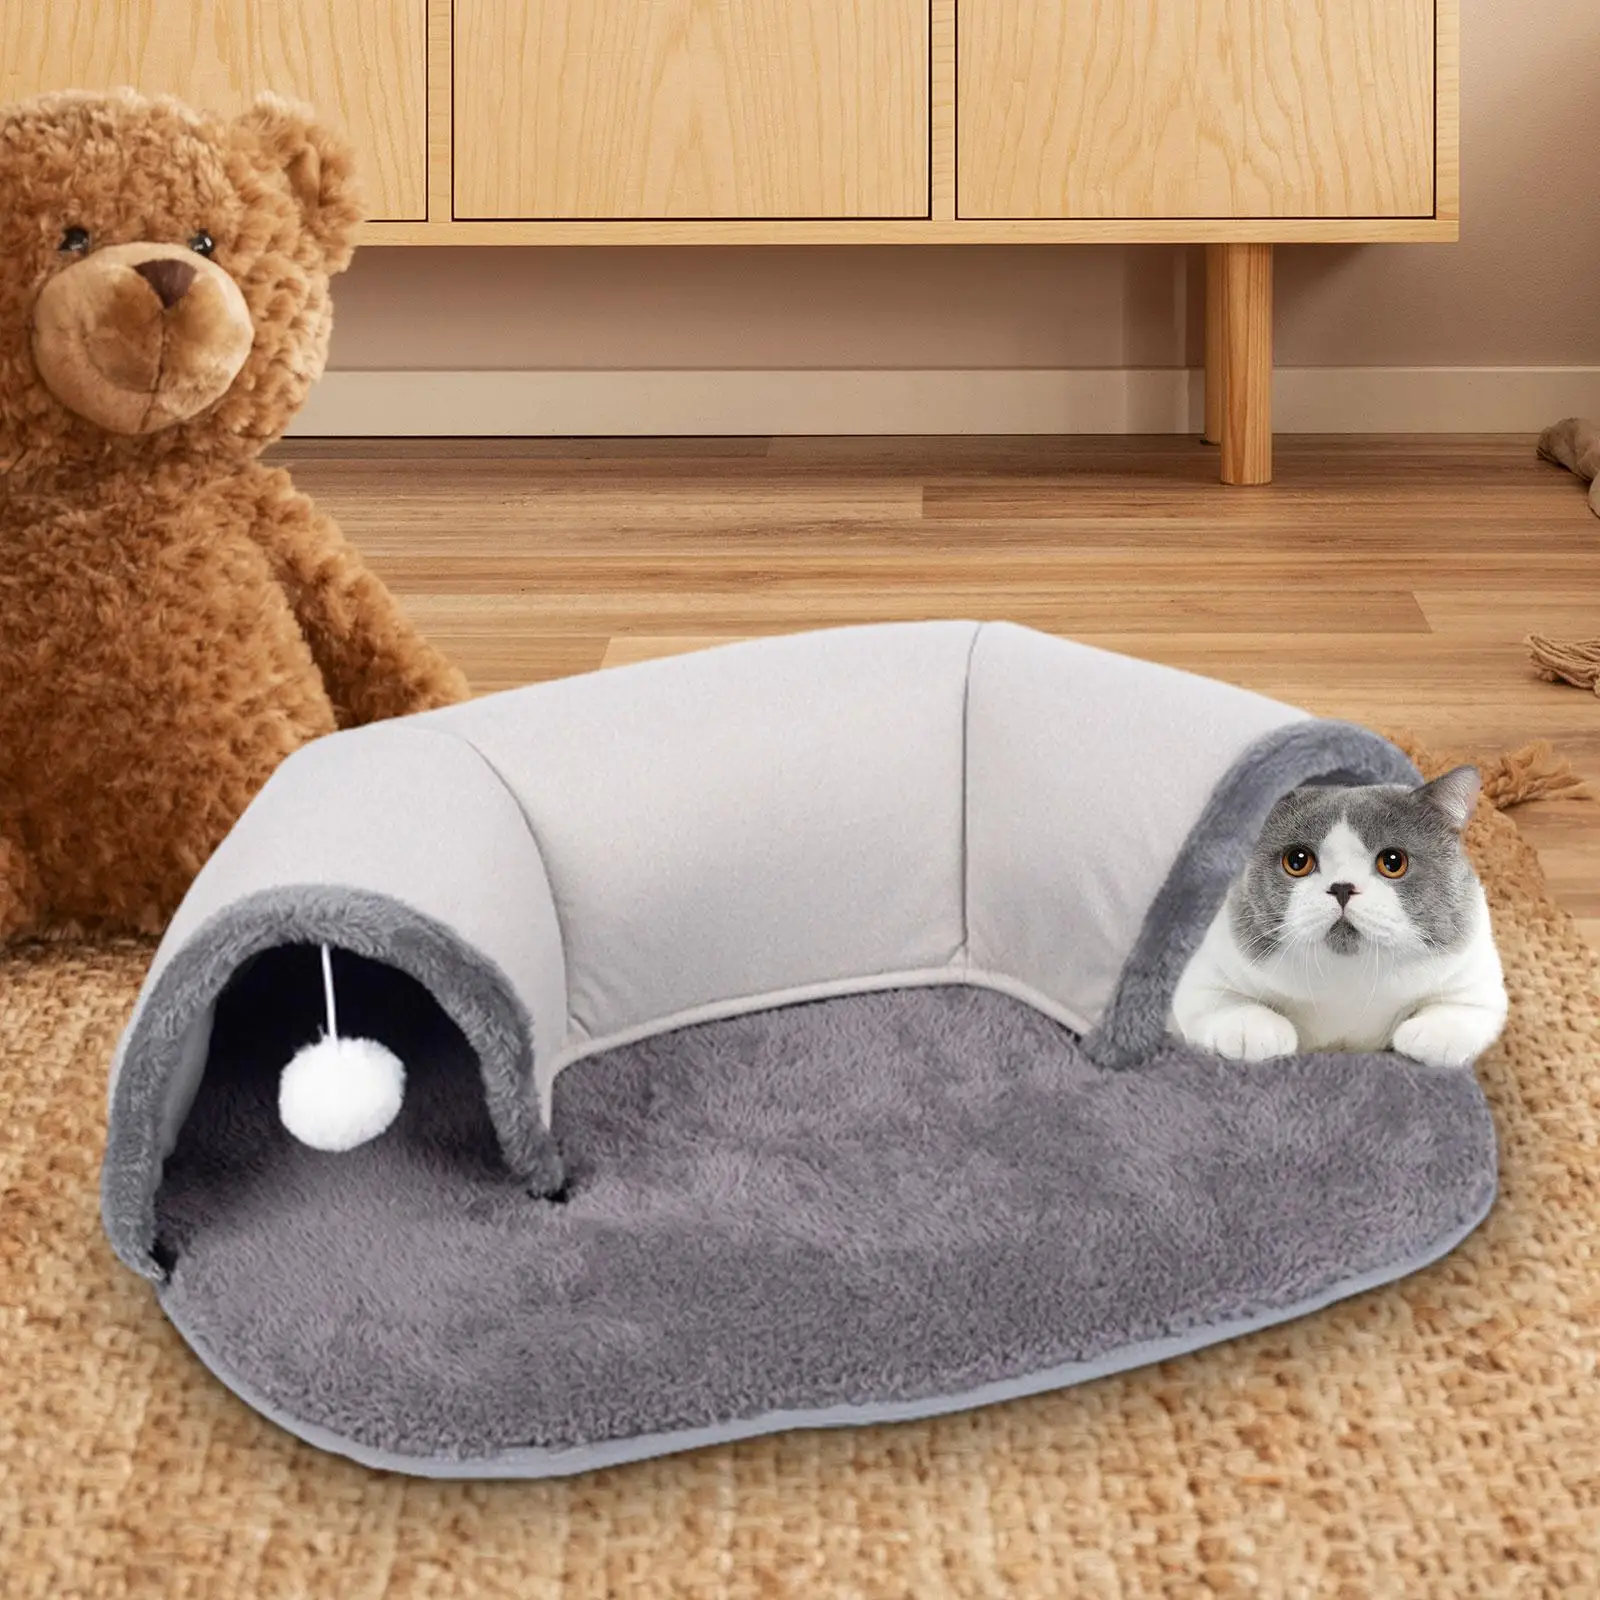 Cat Tunnel and Bed Toy Washable Multifunctional Anti Slip Bottom Plush for Kitten Puppy 65x49x17cm with Toy Ball Fun Exercise